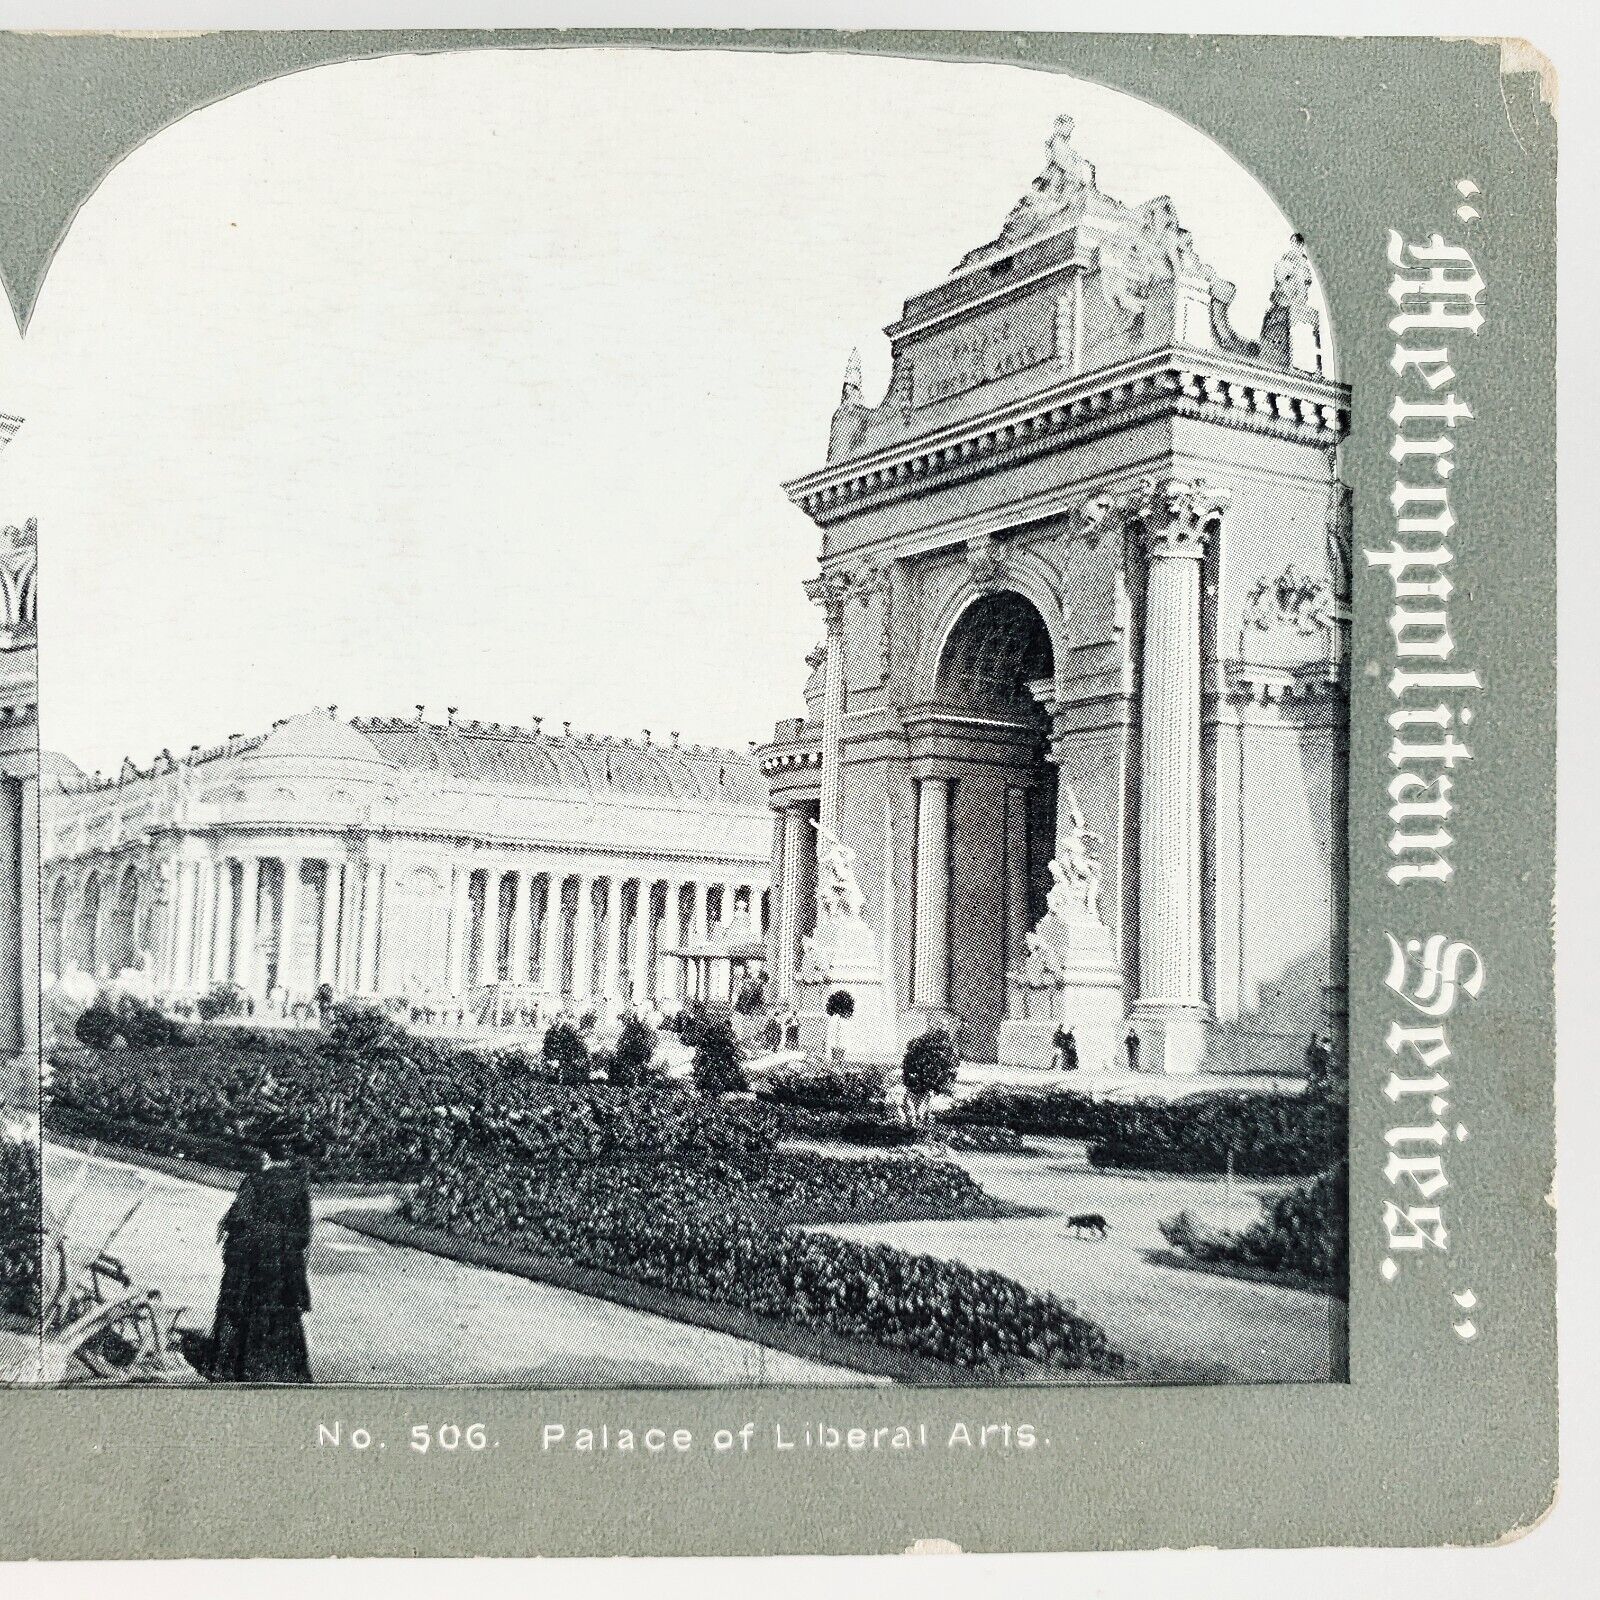 Liberal Arts Palace Exposition Stereoview c1904 St Louis Worlds Fair Card H1179